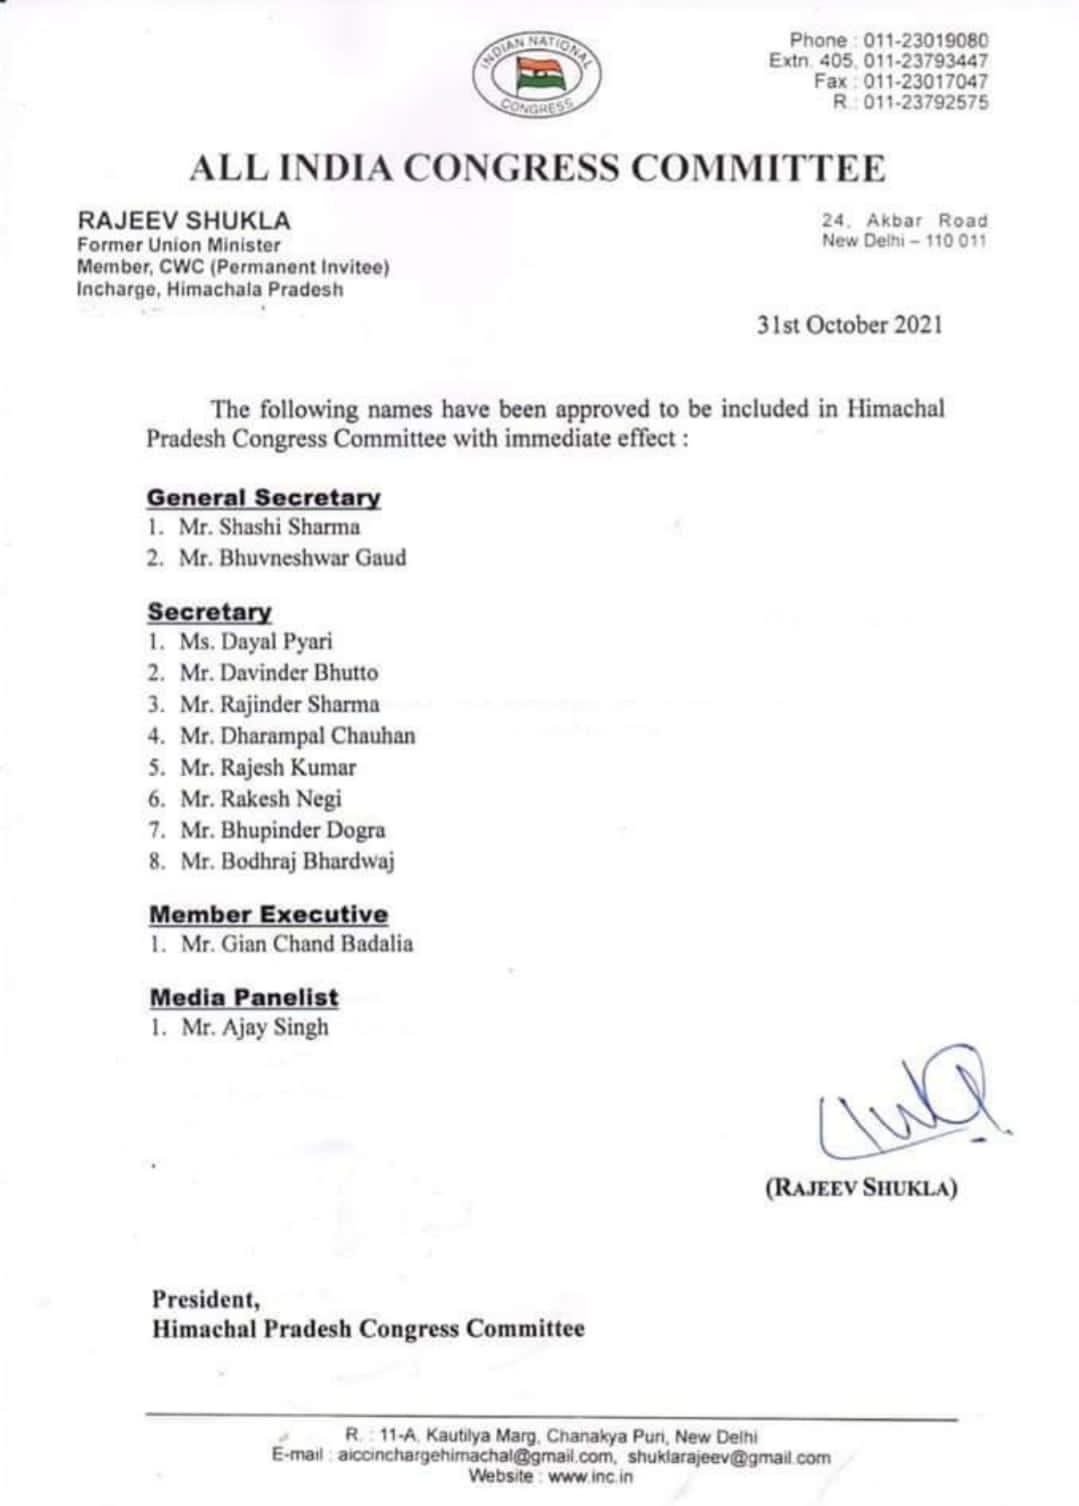 himachal-congress-committee-expanded-its-executive